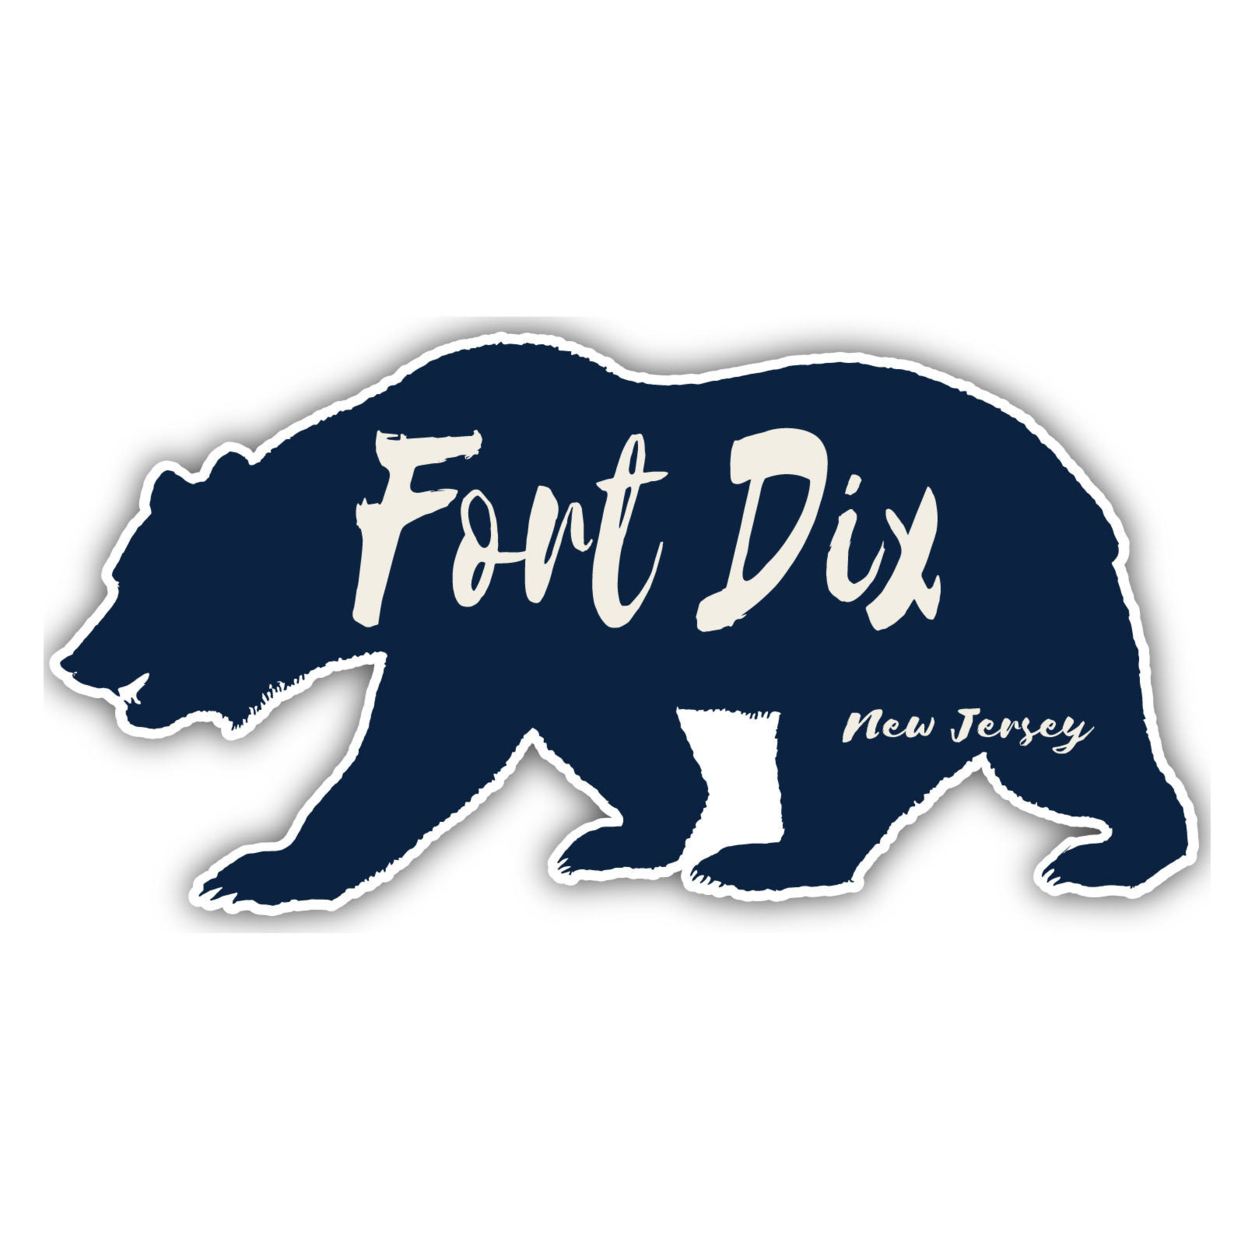 Fort Dix New Jersey Souvenir Decorative Stickers (Choose Theme And Size) - Single Unit, 10-Inch, Great Outdoors